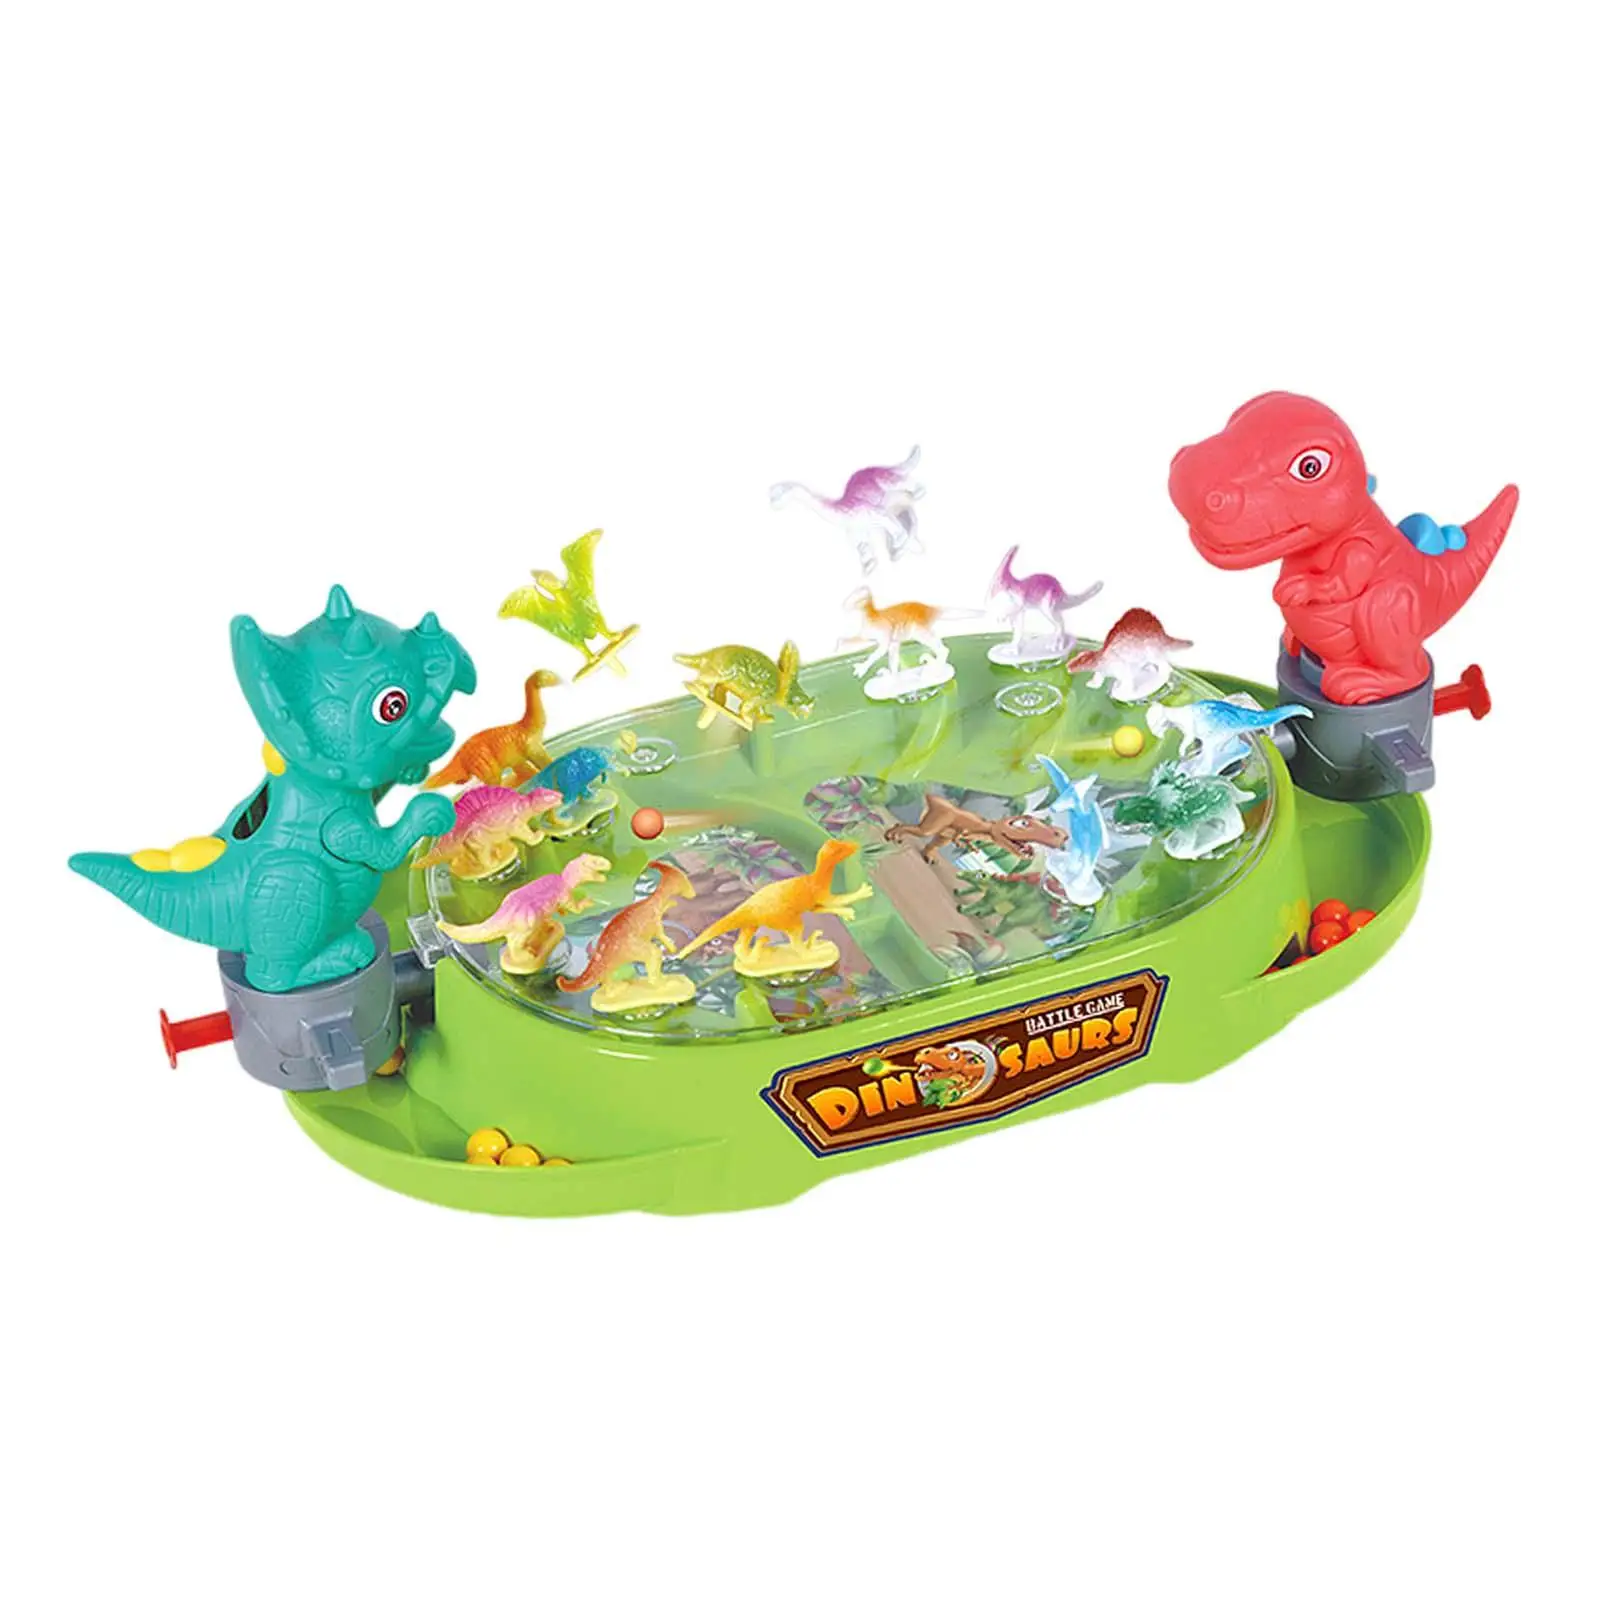 Battles Board Game Dinosaur Board Play for Adults and Kids Boys Children